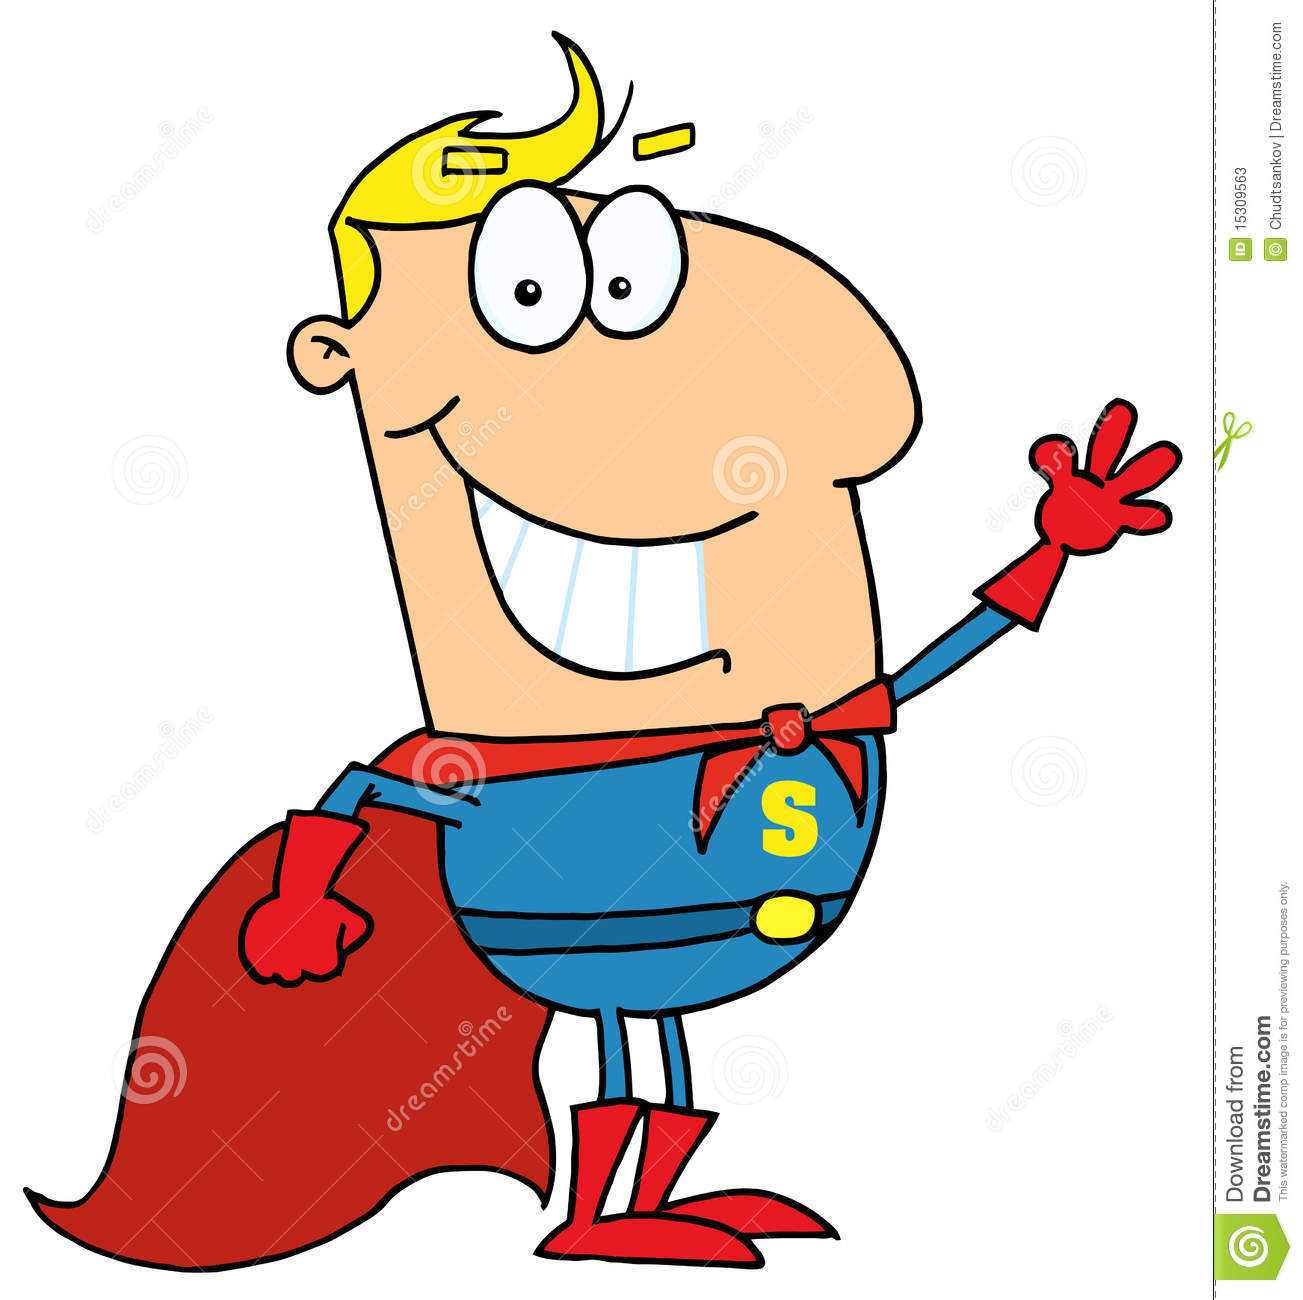 Super Dad Clipart Images   Pictures   Becuo